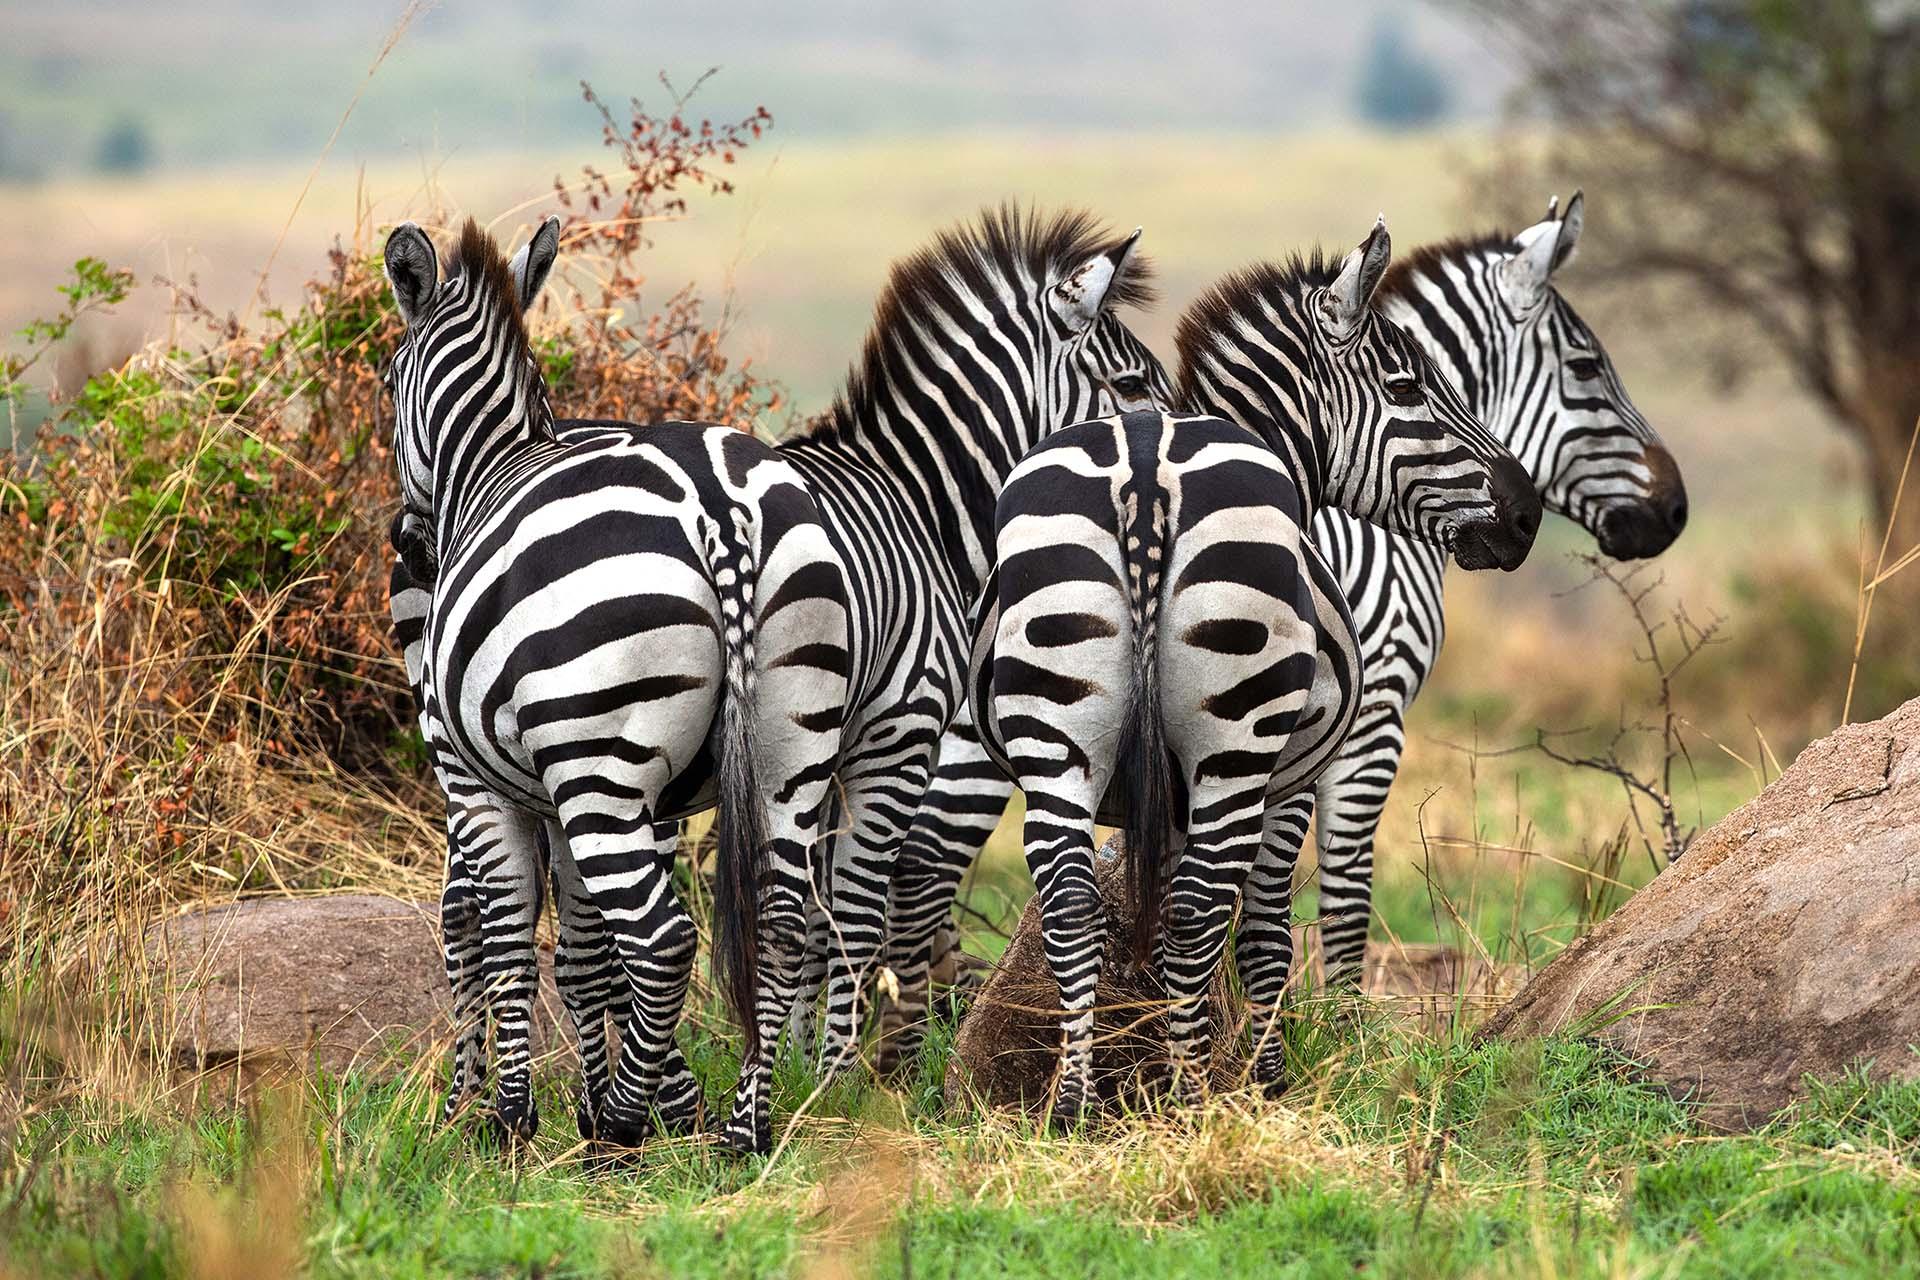 Zebra migrate together with the wildebeest